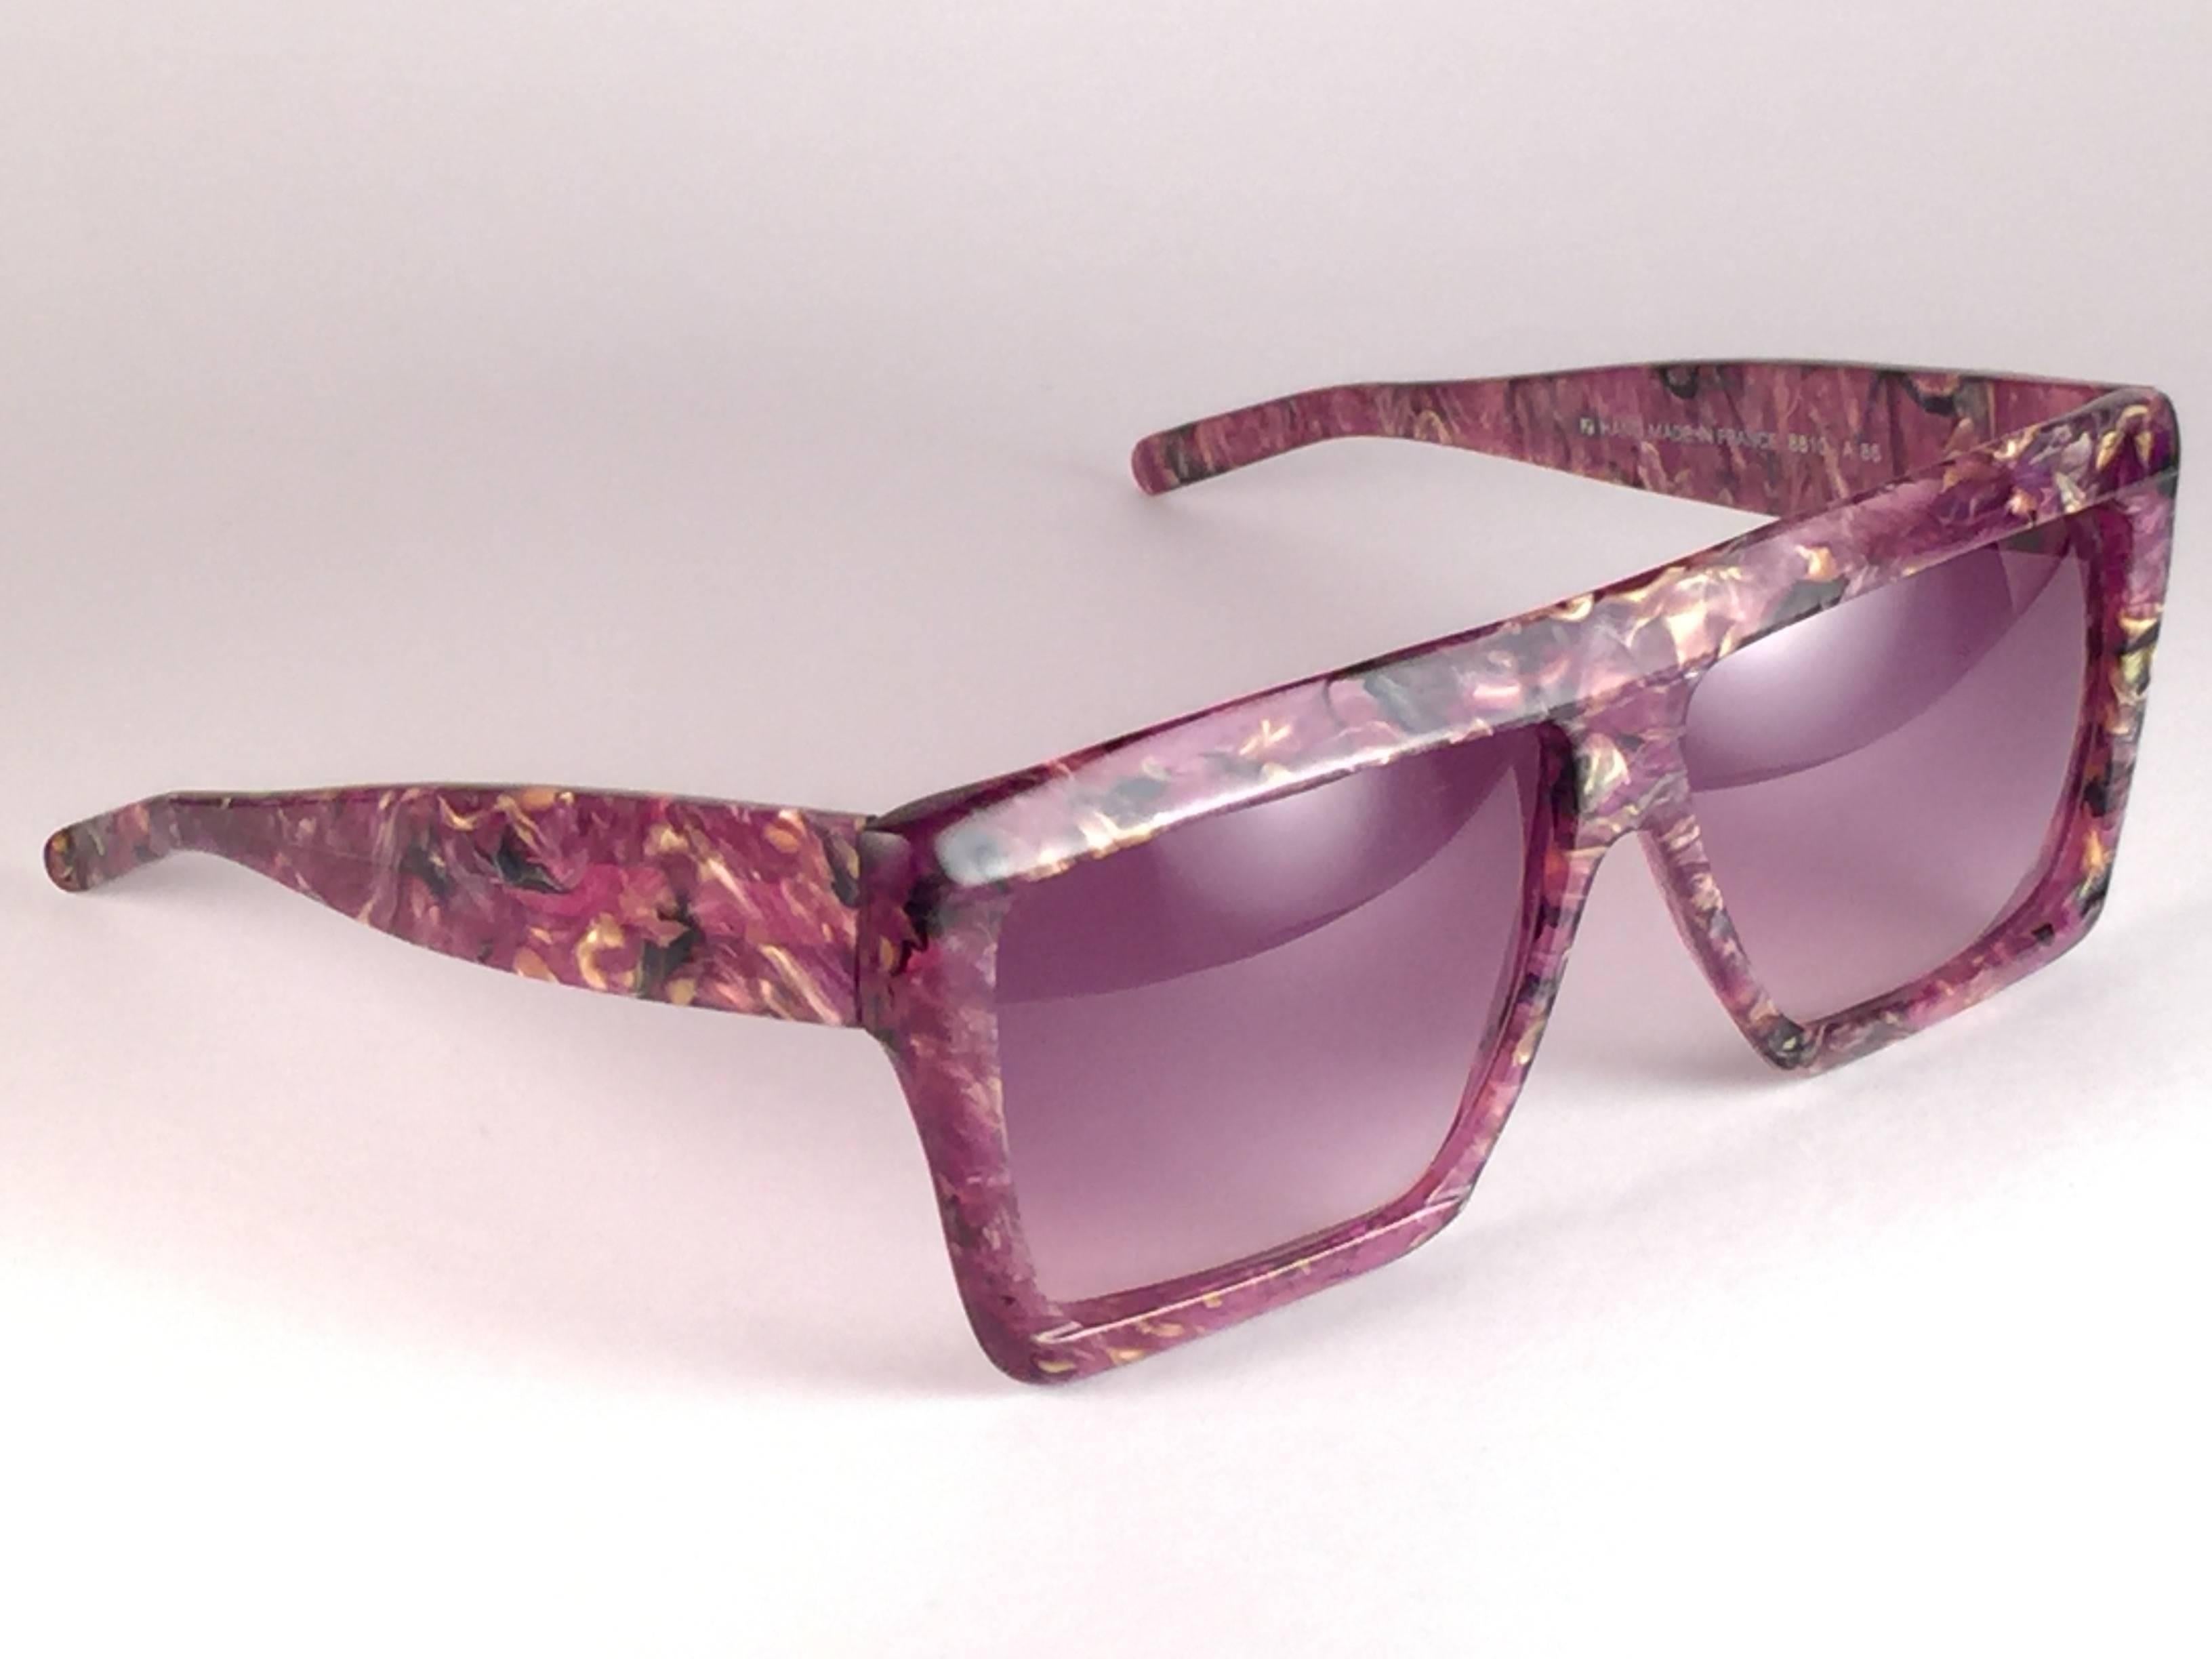 New vintage Courreges sunglasses purple multicolored translucent frame light purple lenses 8810 a 86 handmade in France 1970’s 
 
Genius designer Andre Courreges signed this beautiful pair of 1970’s sunglasses. Impossible to acurately describe the